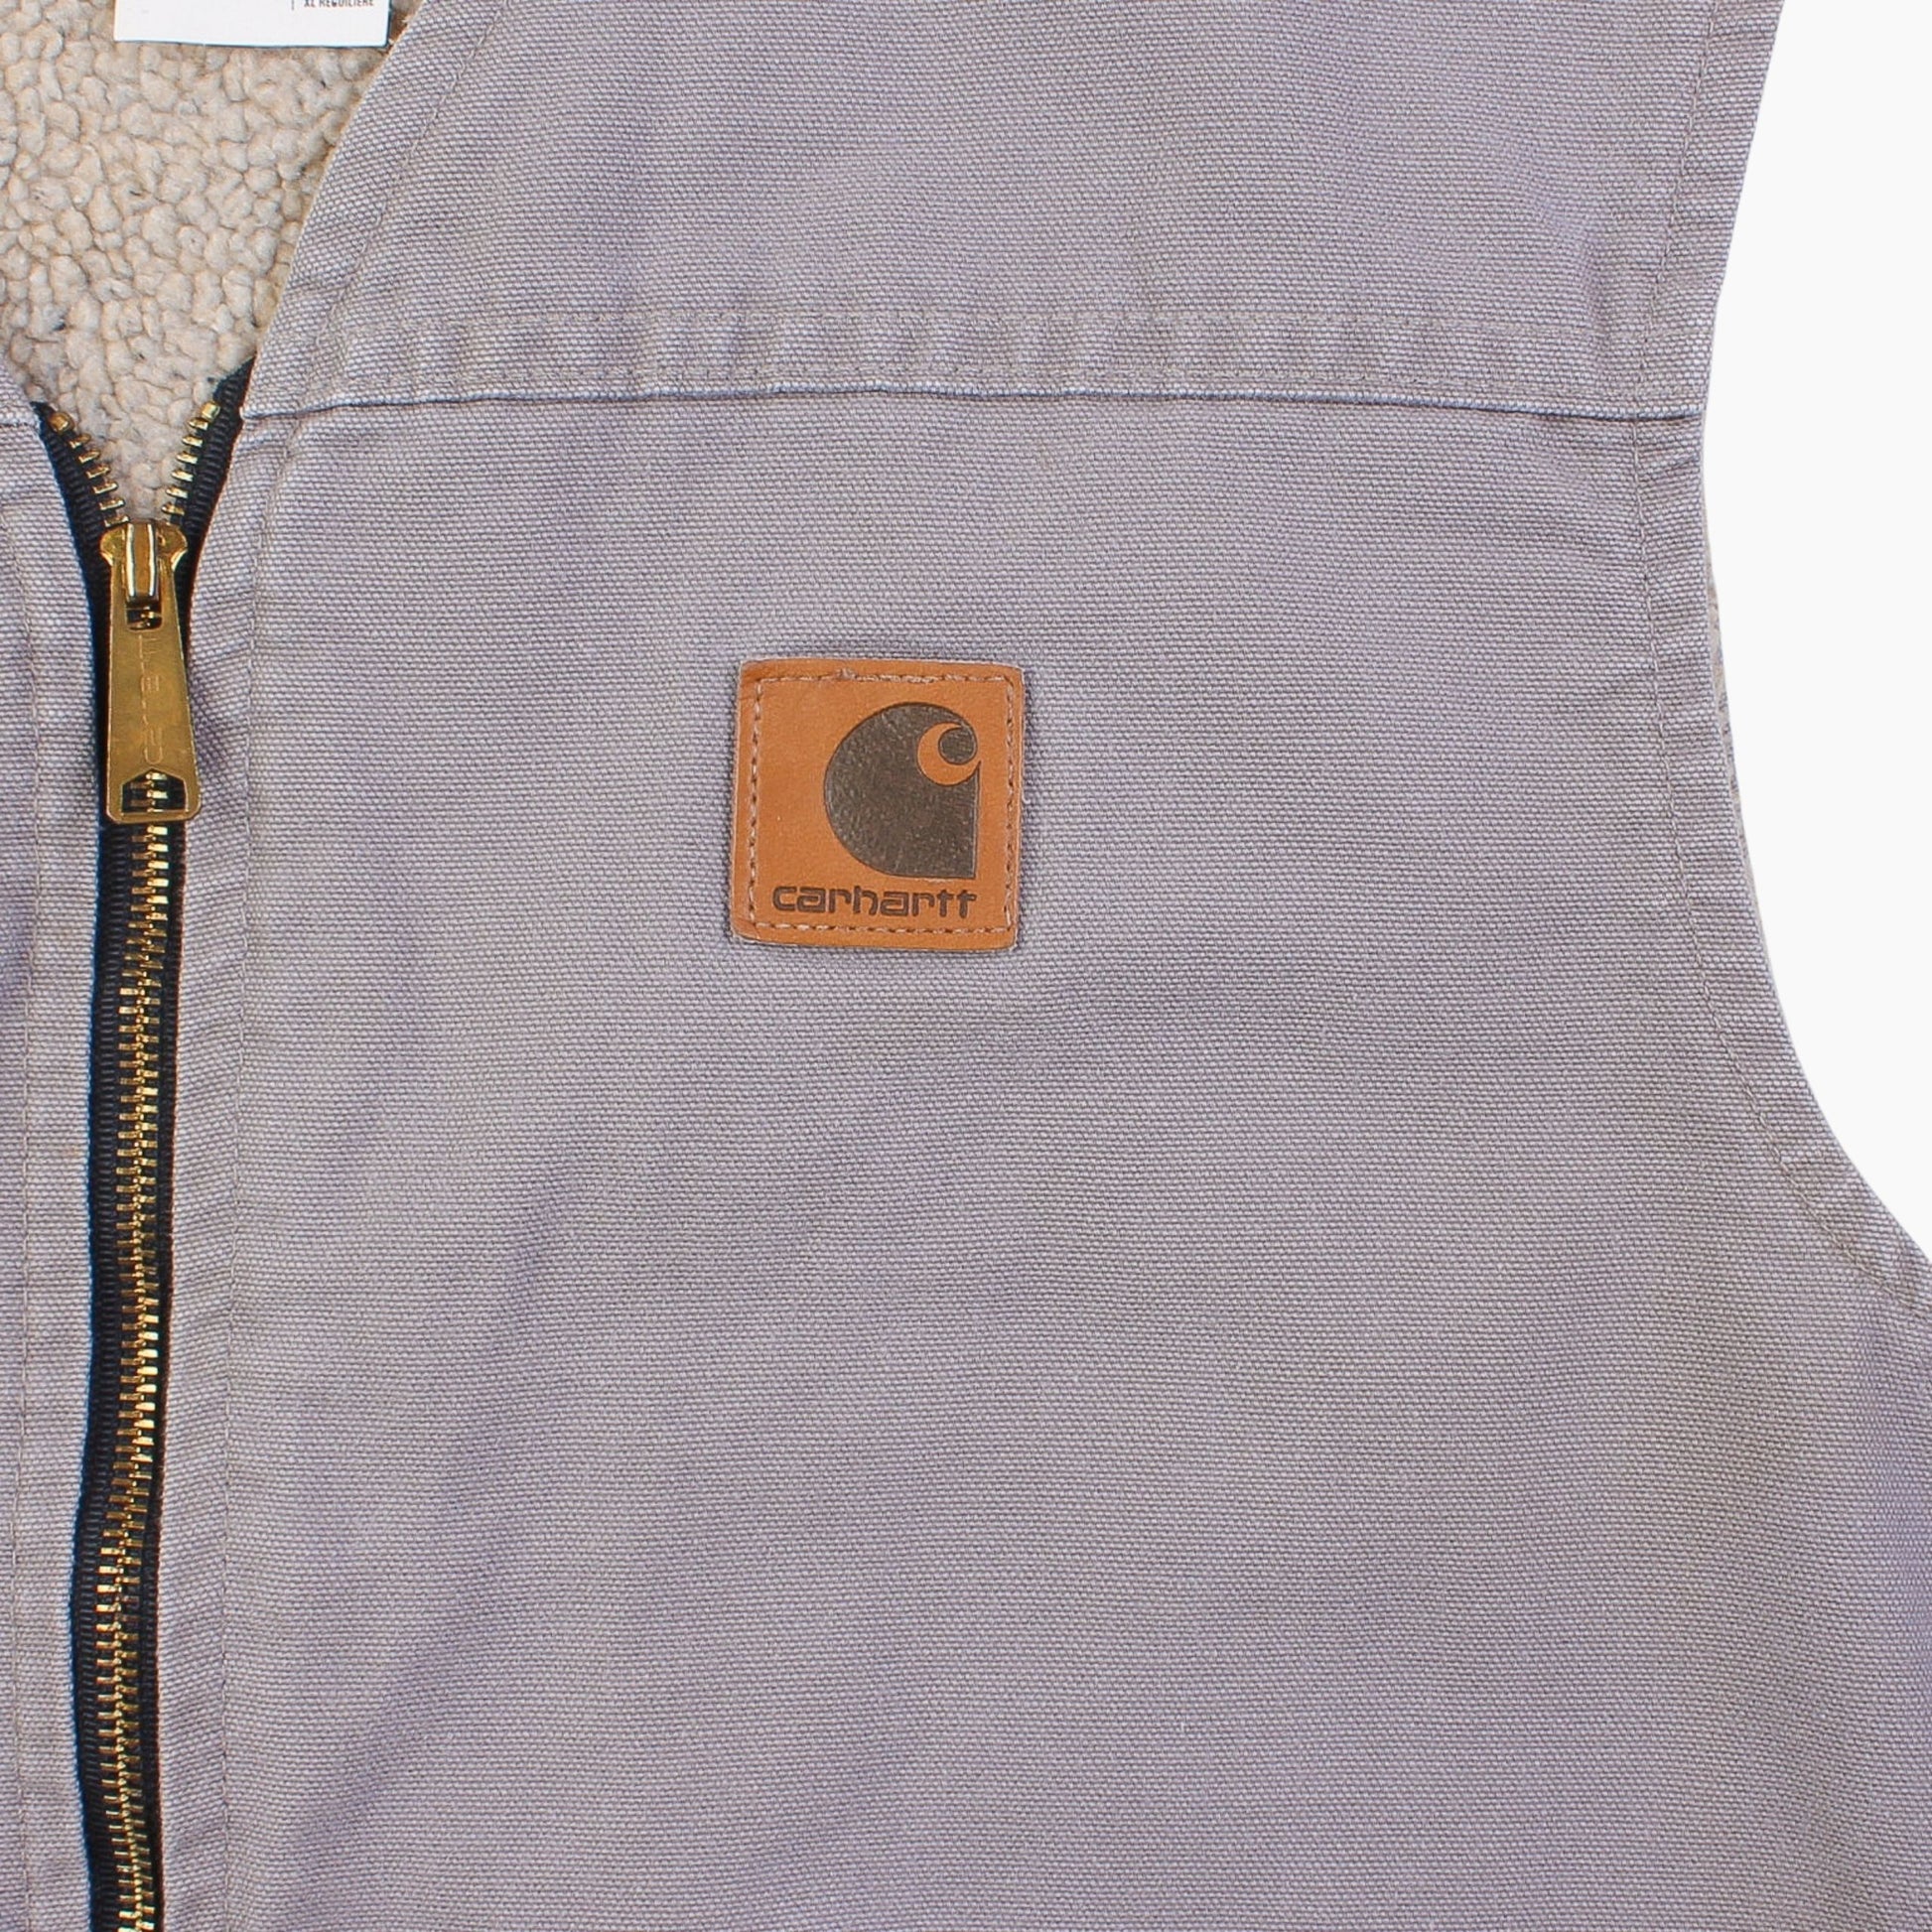 Lined Vest - Grey - American Madness